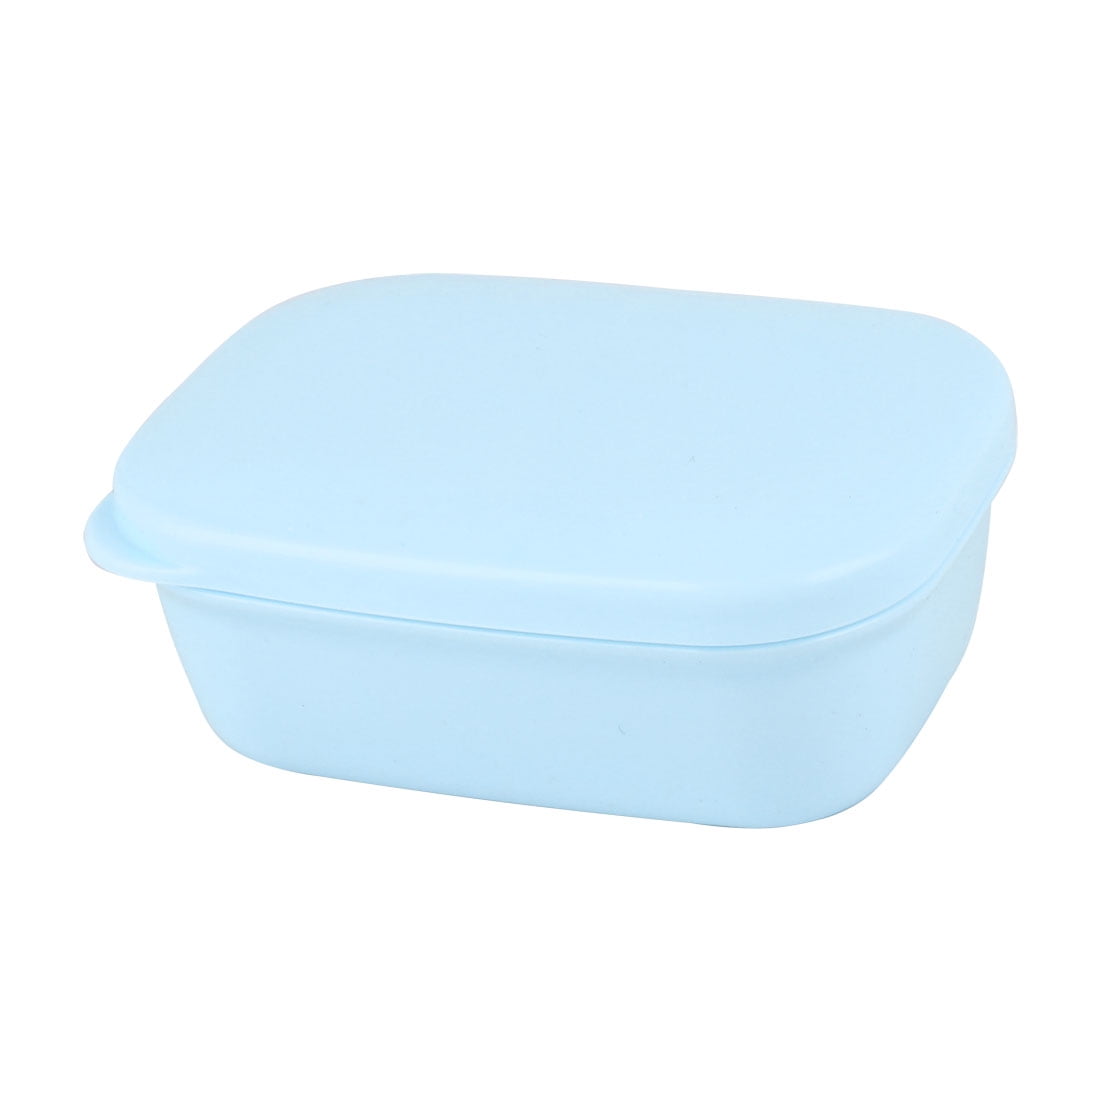 Home Plastic Rectangular Shaped Soap Dry Holder Container Case Box ...